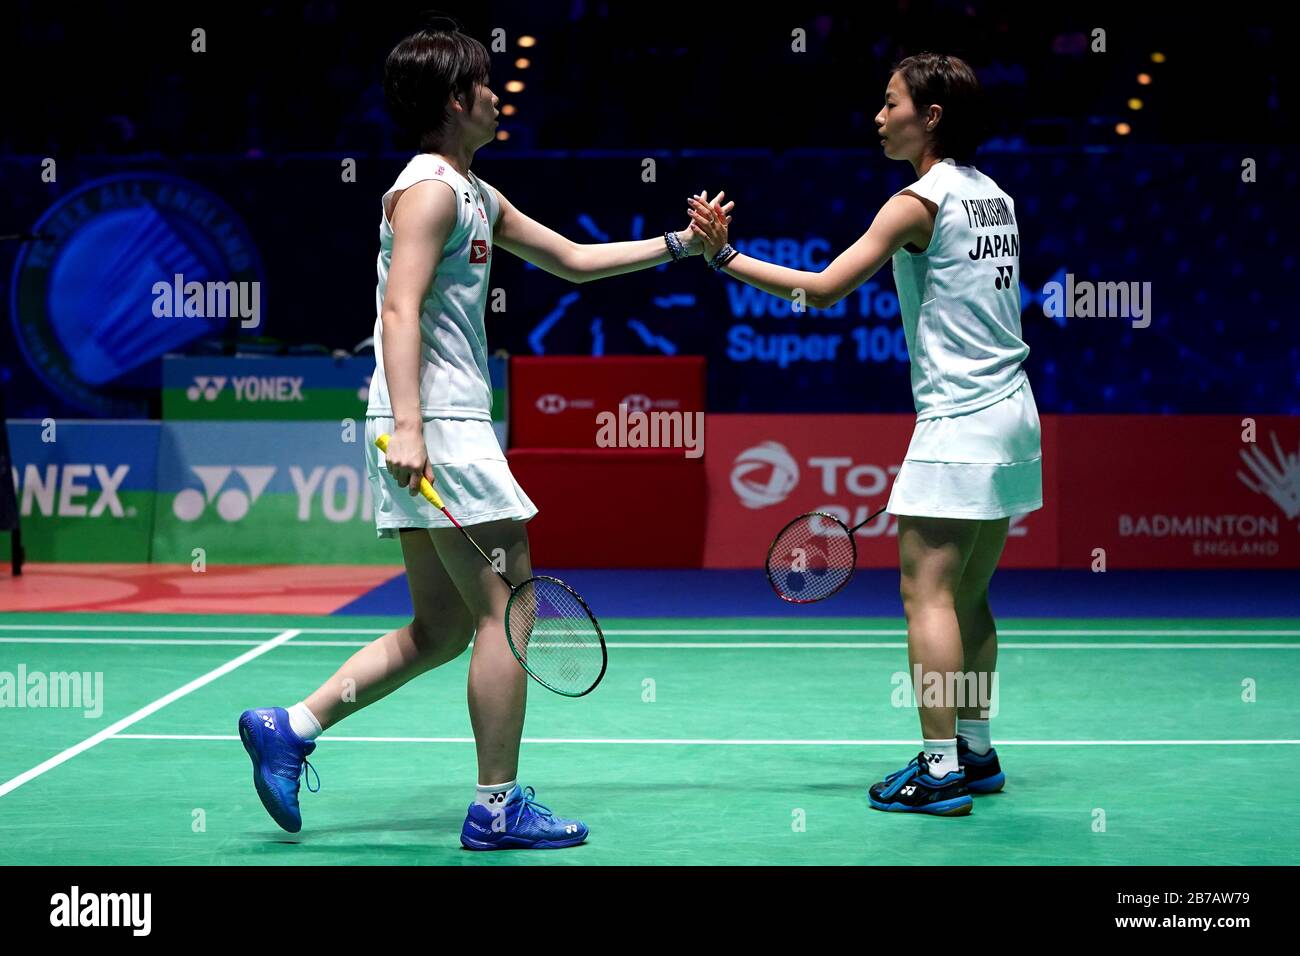 Japans Sayaka Hirota (left) and Yuki Fukushima in action in the Womens doubles semi final match during the YONEX All England Open Badminton Championships at Arena Birmingham Stock Photo